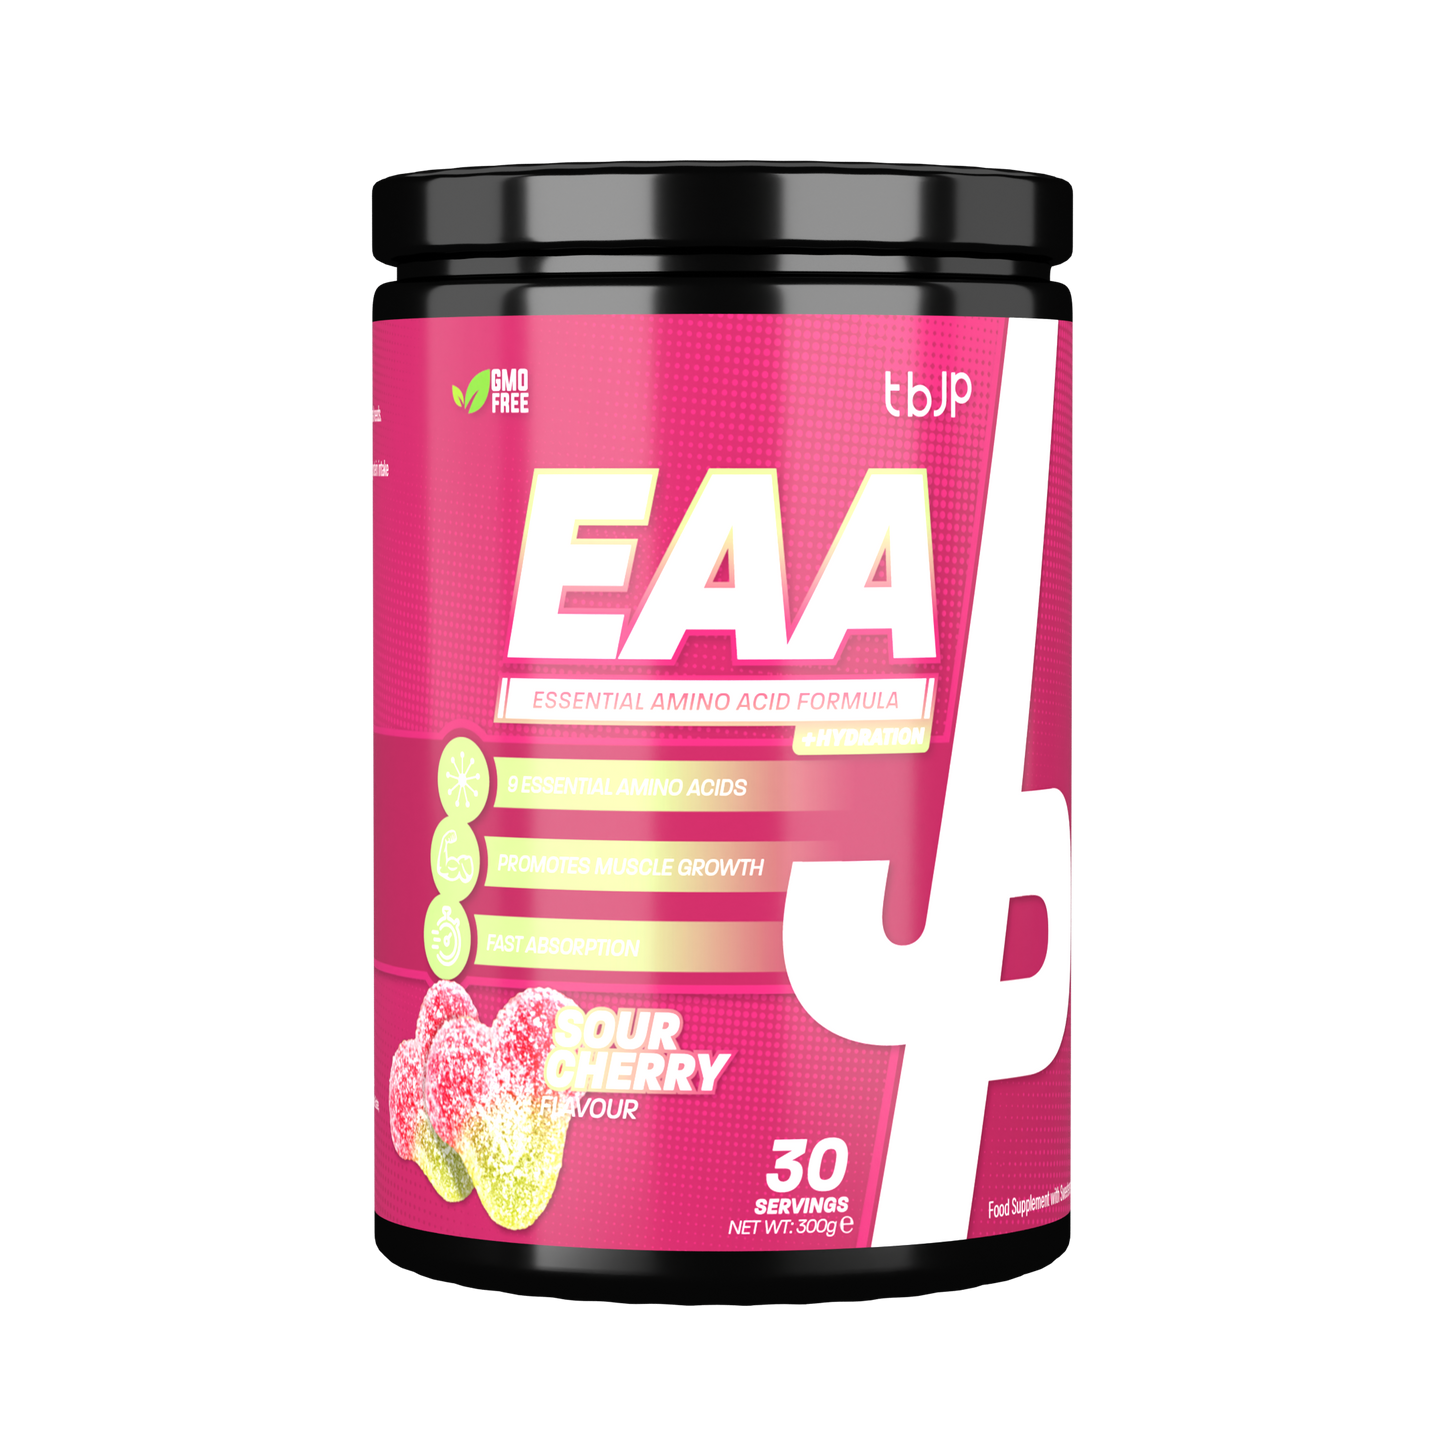 Trained by JP EAA Essential Amino Acid Formula 300g 30 servings